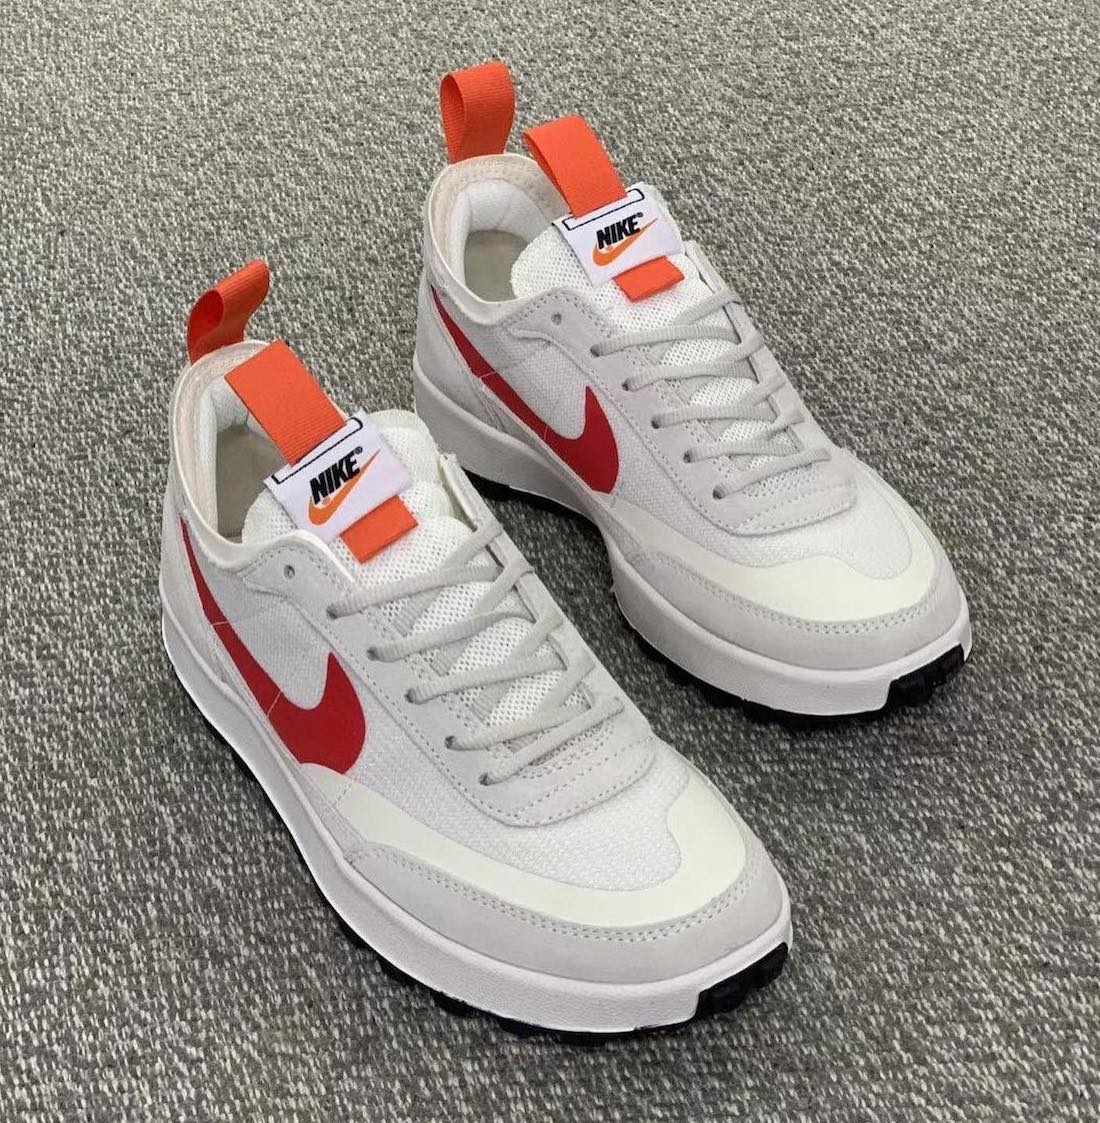 Tom Sachs NikeCraft General Purpose Shoe White Red Release Information